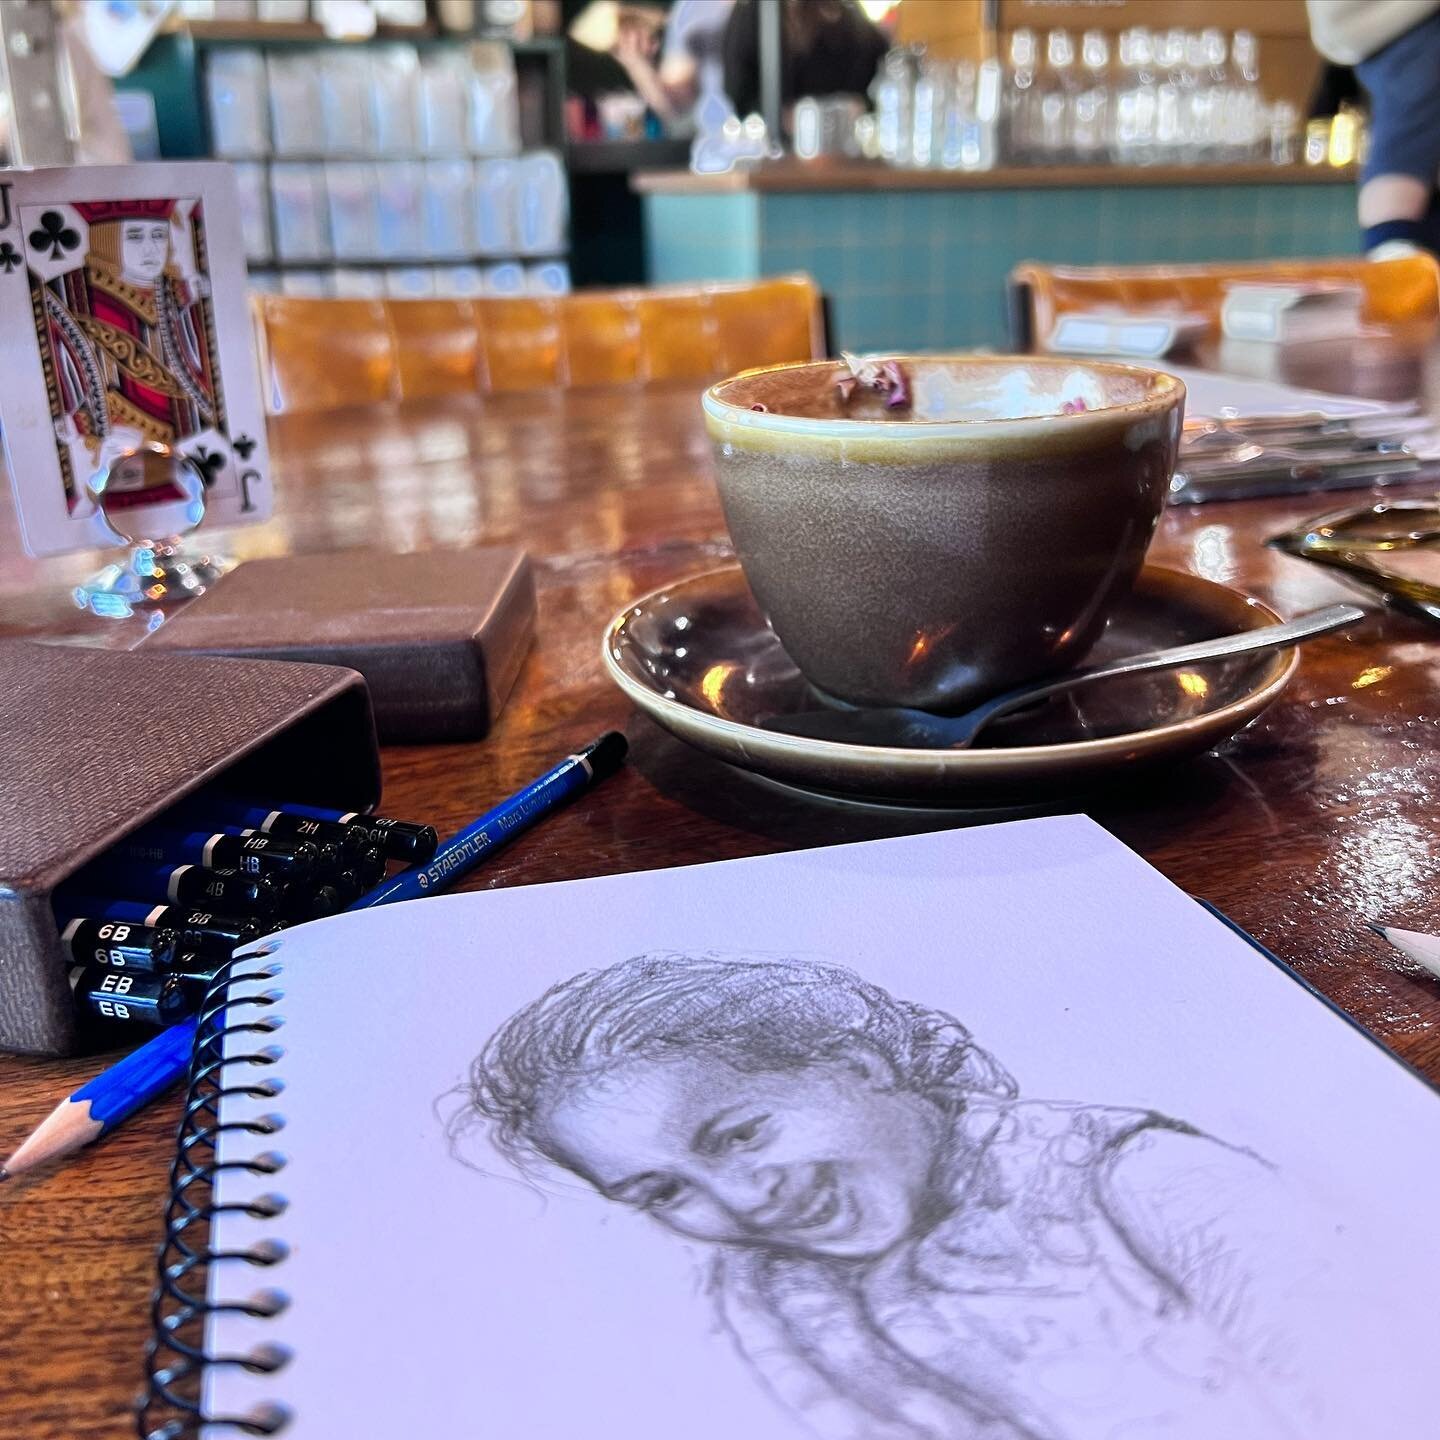 Sketching and planning while sipping chai in the warmth of my local cafe 🌼🧡☺️

#ourscafeandgoods #moffatbeach #graphitedrawing #leadpencil #portait #sketching #sunshinecoast #sunshinecoastartist #cafeart #chailatte #wintervibes #paintingplanning #c